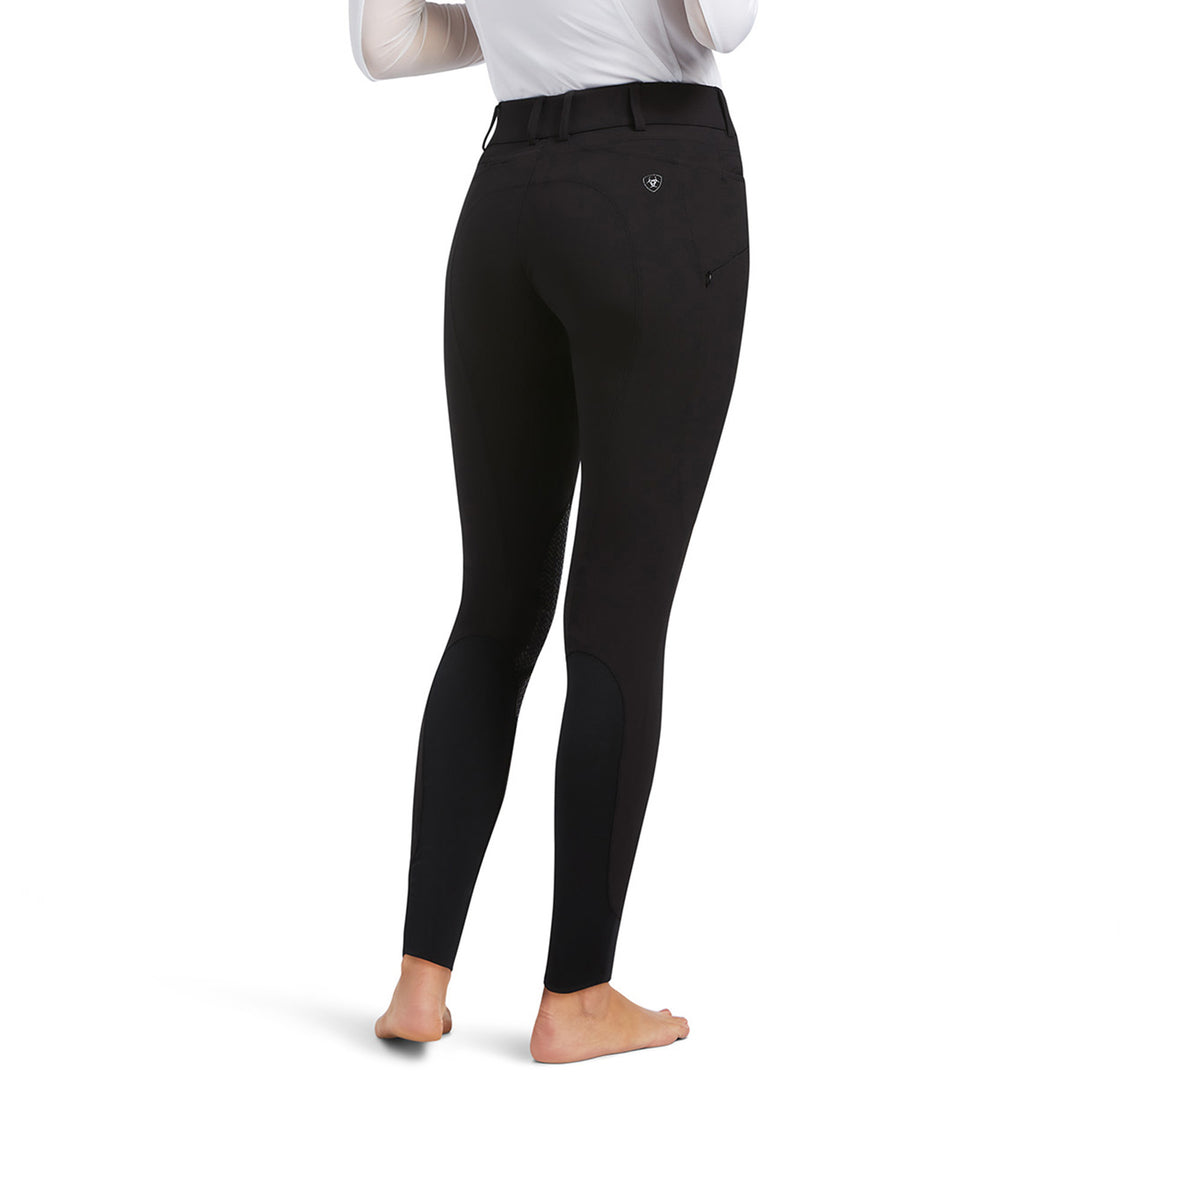 Ariat Women's Prevail Insulated Full Seat Riding Tights - Black